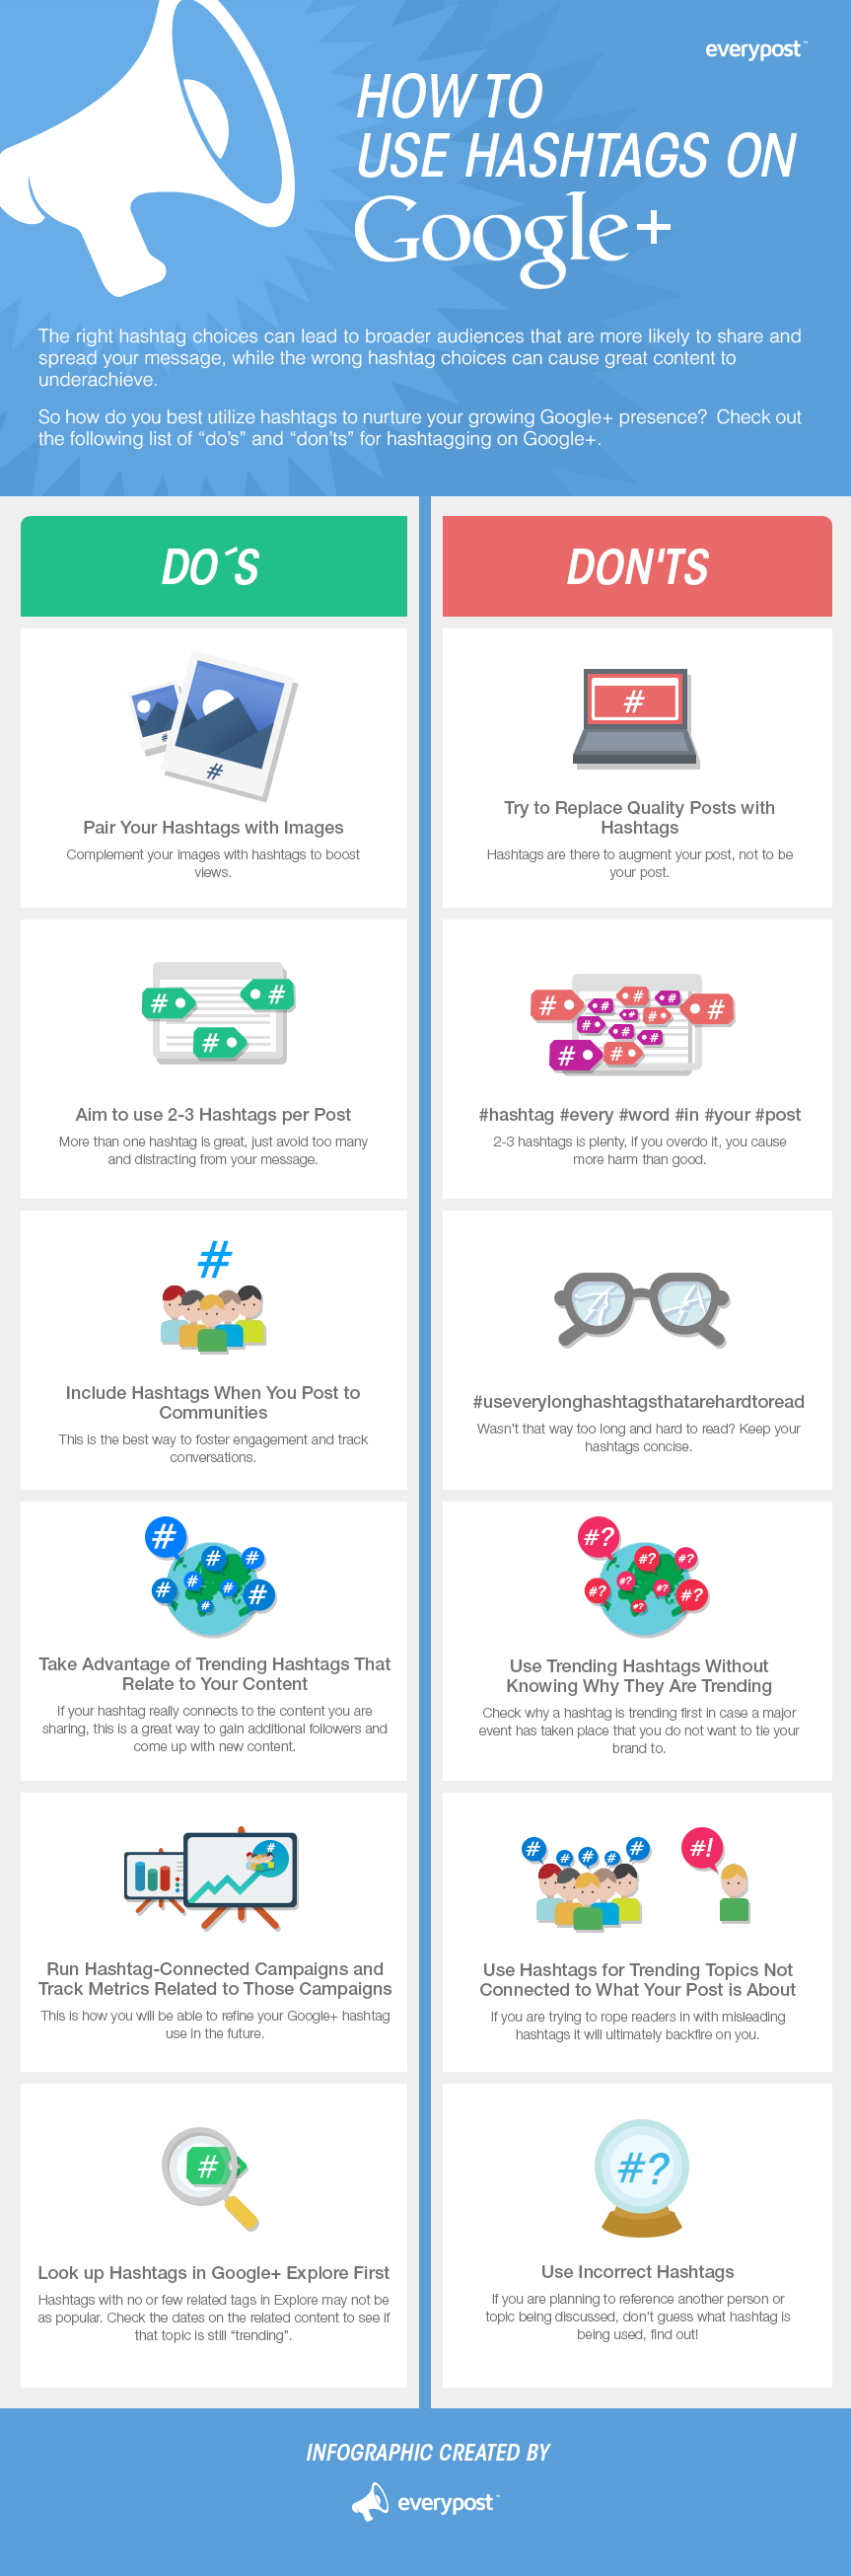 How to Use Hashtags on #GooglePlus: Dos and Don'ts - #infographic #socialmedia #marketing